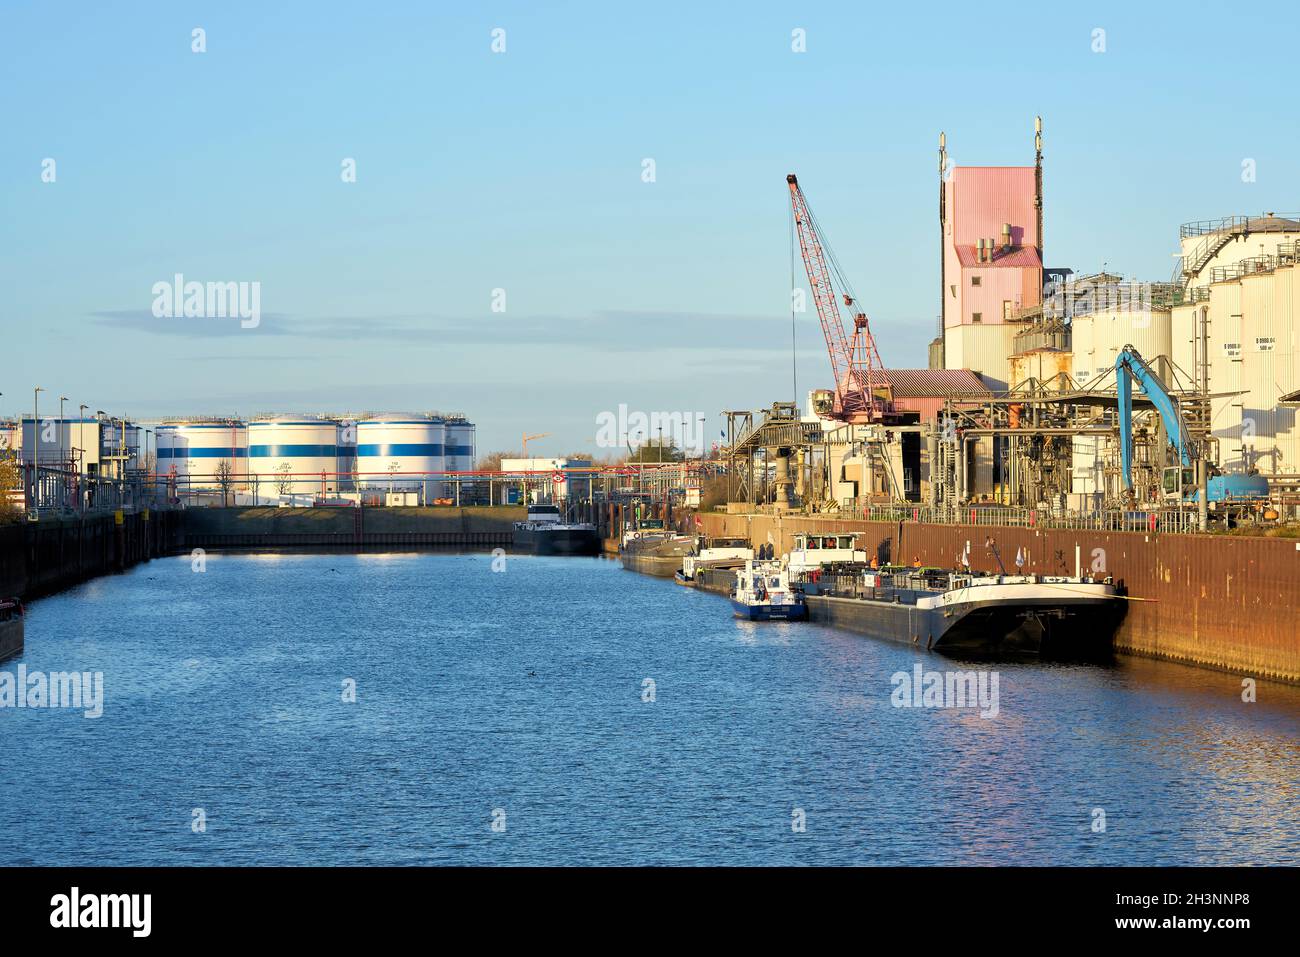 Port in the Rothensee industrial area on the Elbe near Magdeburg Stock Photo